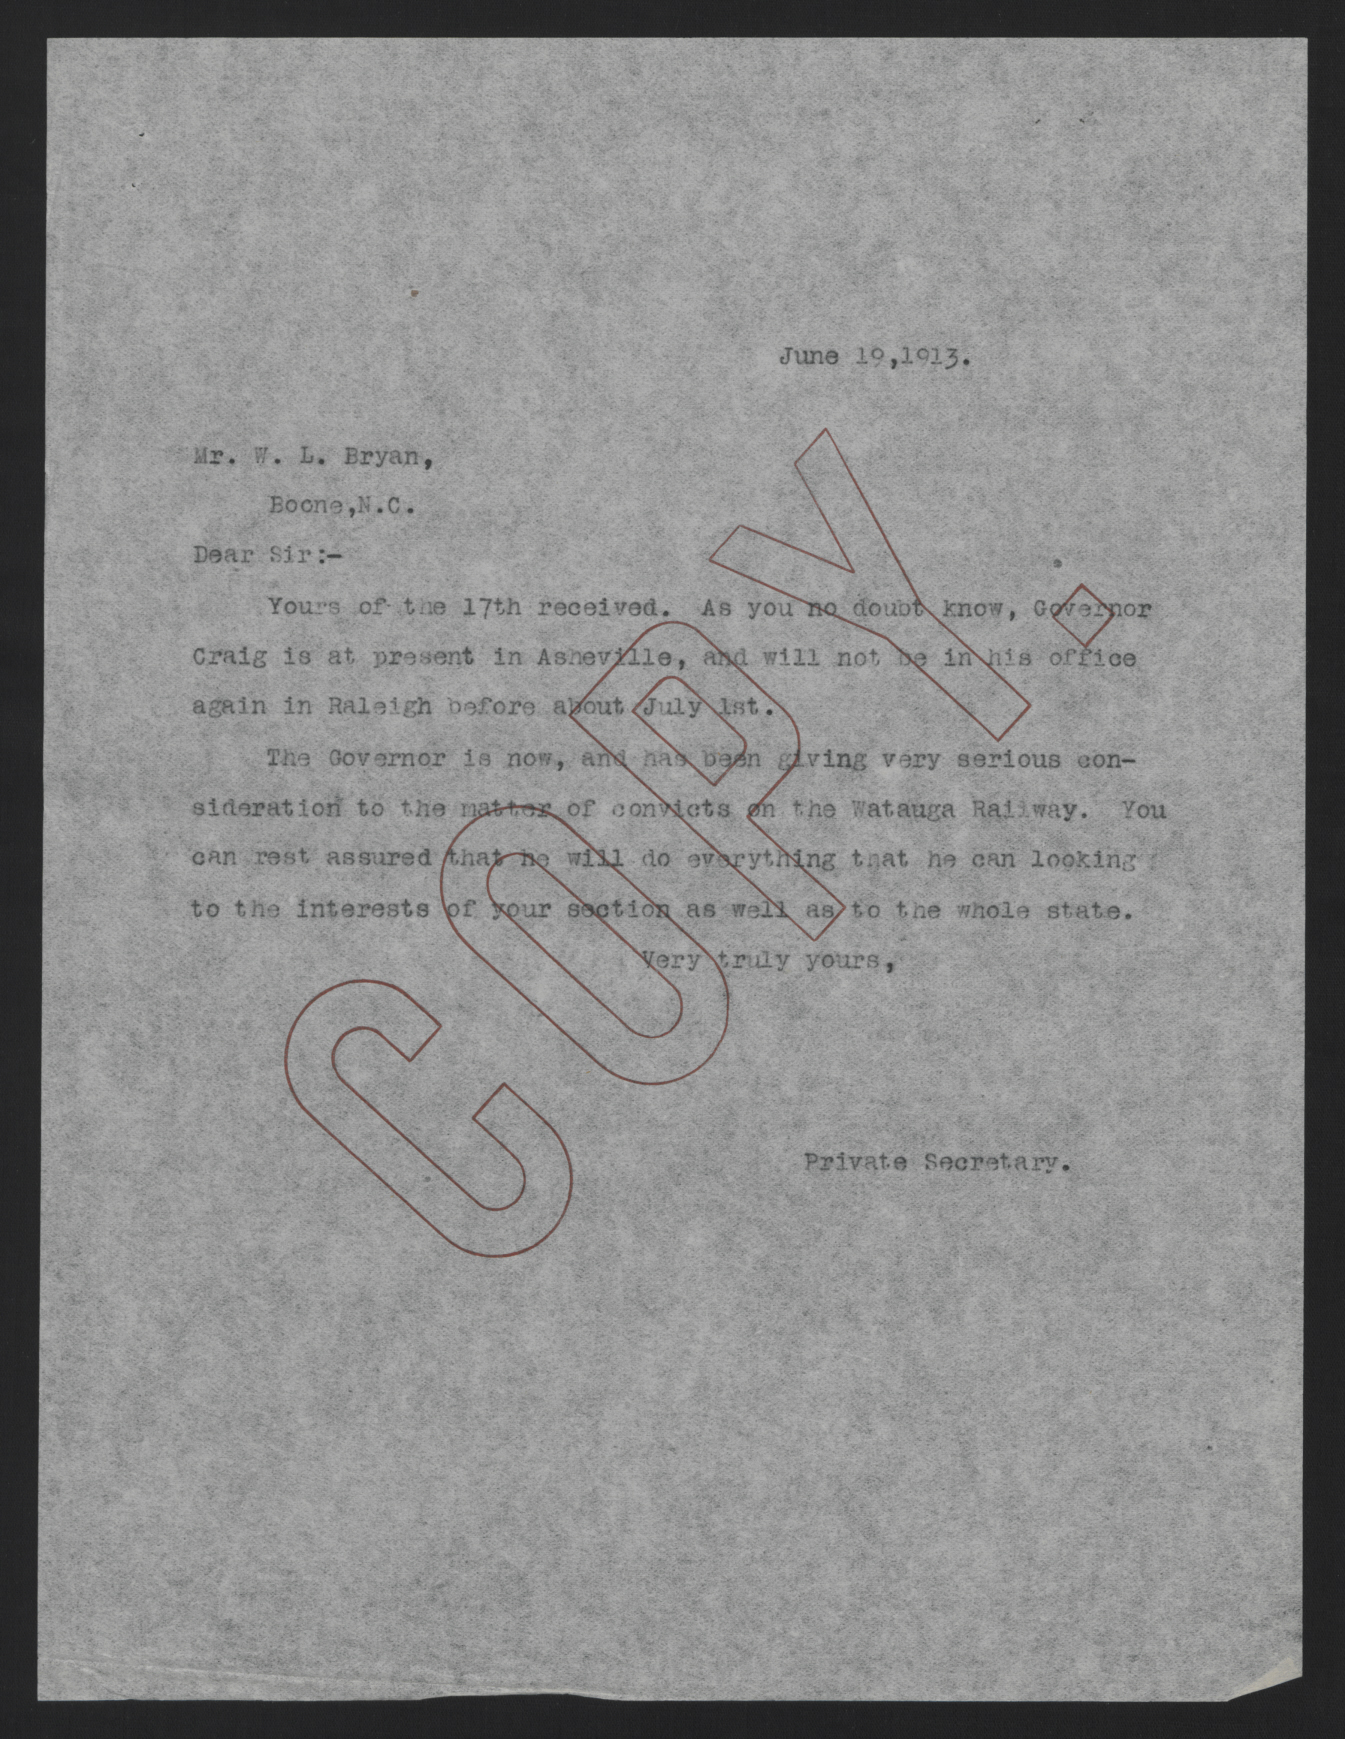 Letter from Kerr to Bryan, June 19, 1913